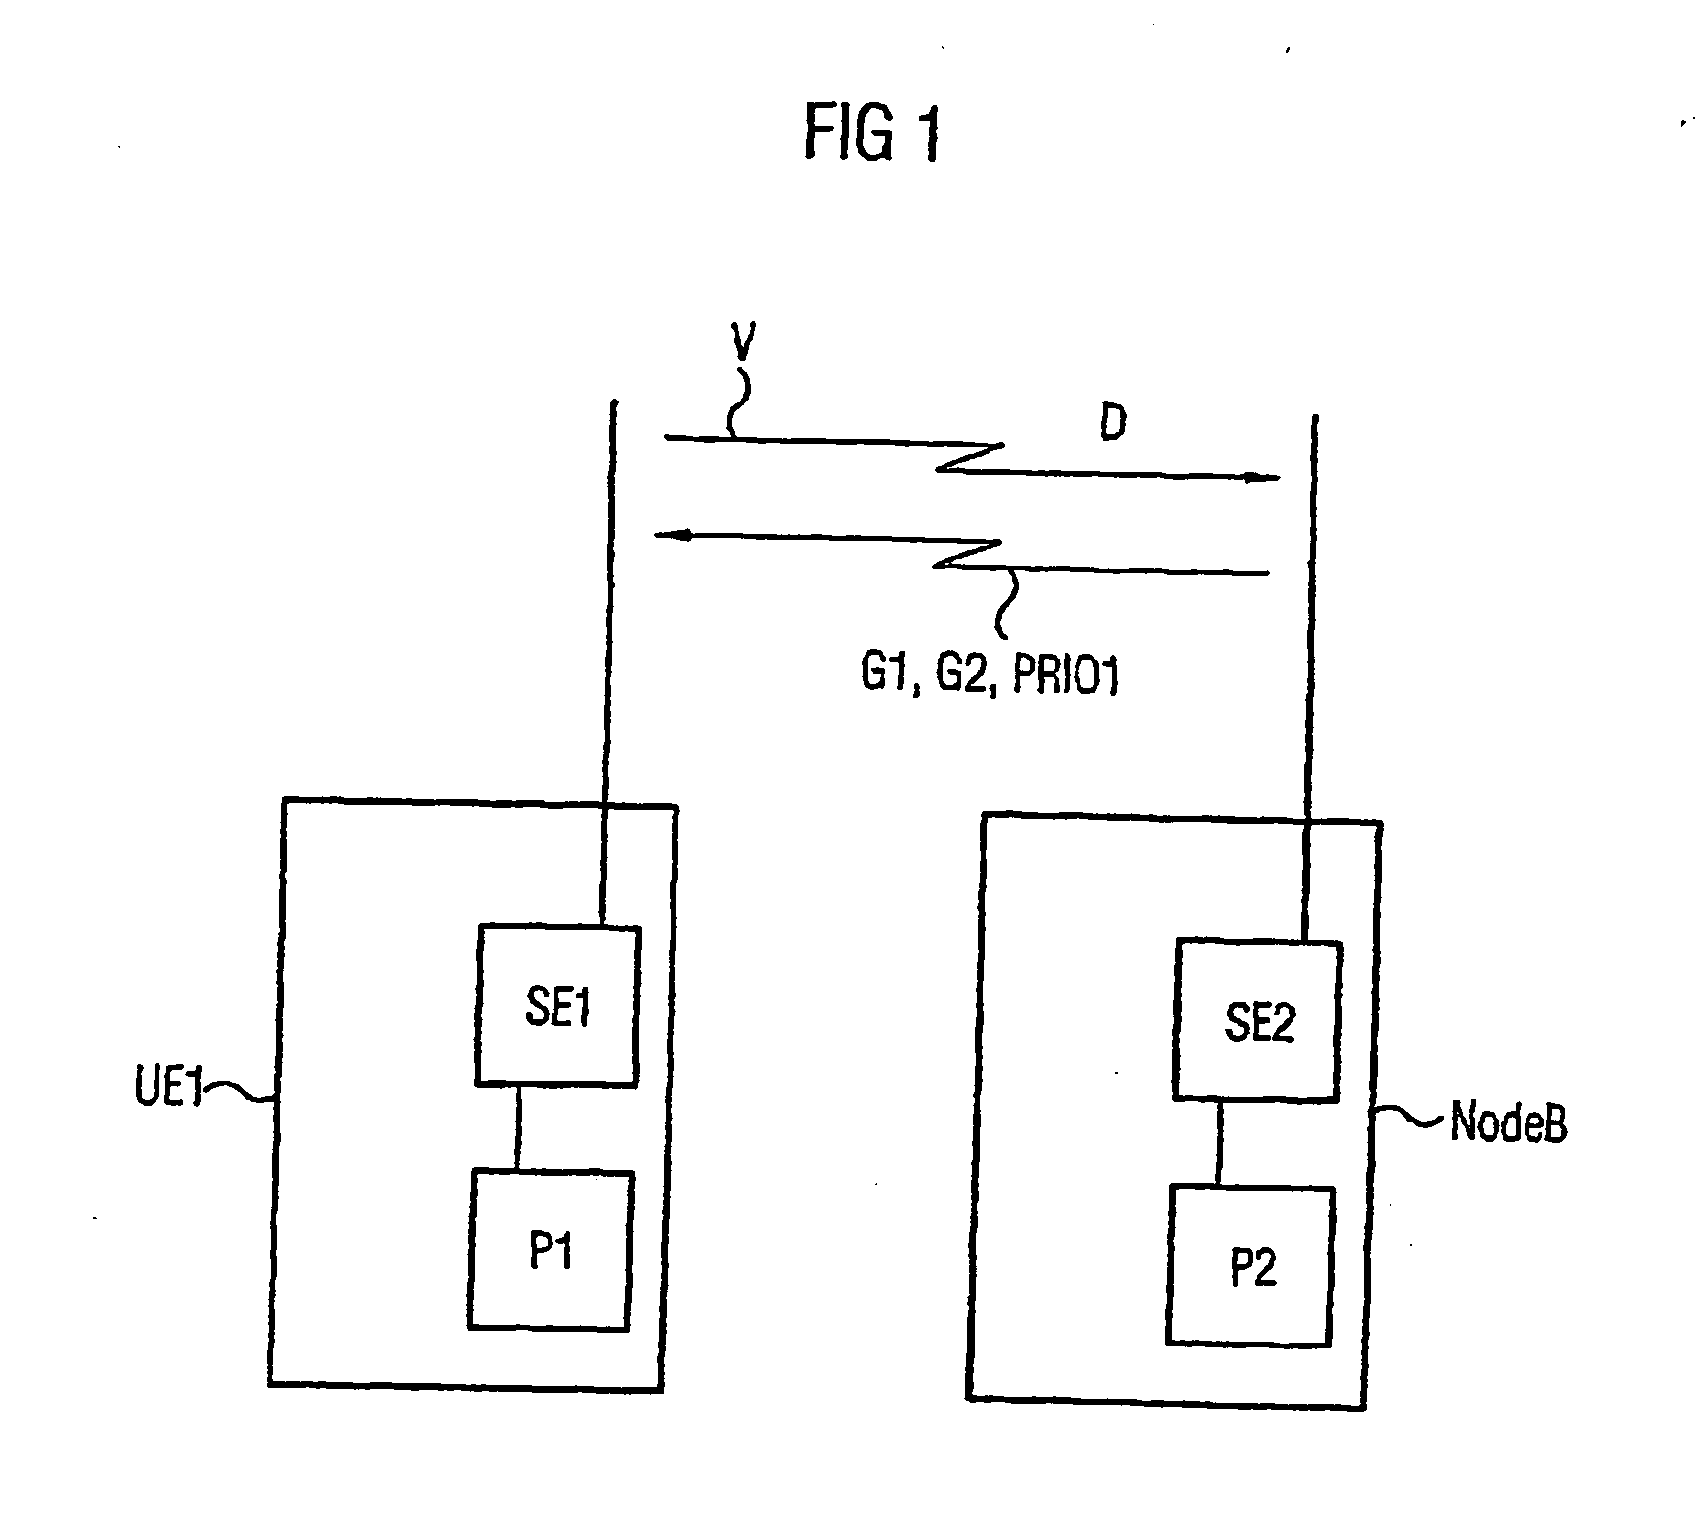 Method for transmitting data from a transmitting station to a receiving station via a radio link, and corresponding receiving station and transmitting station